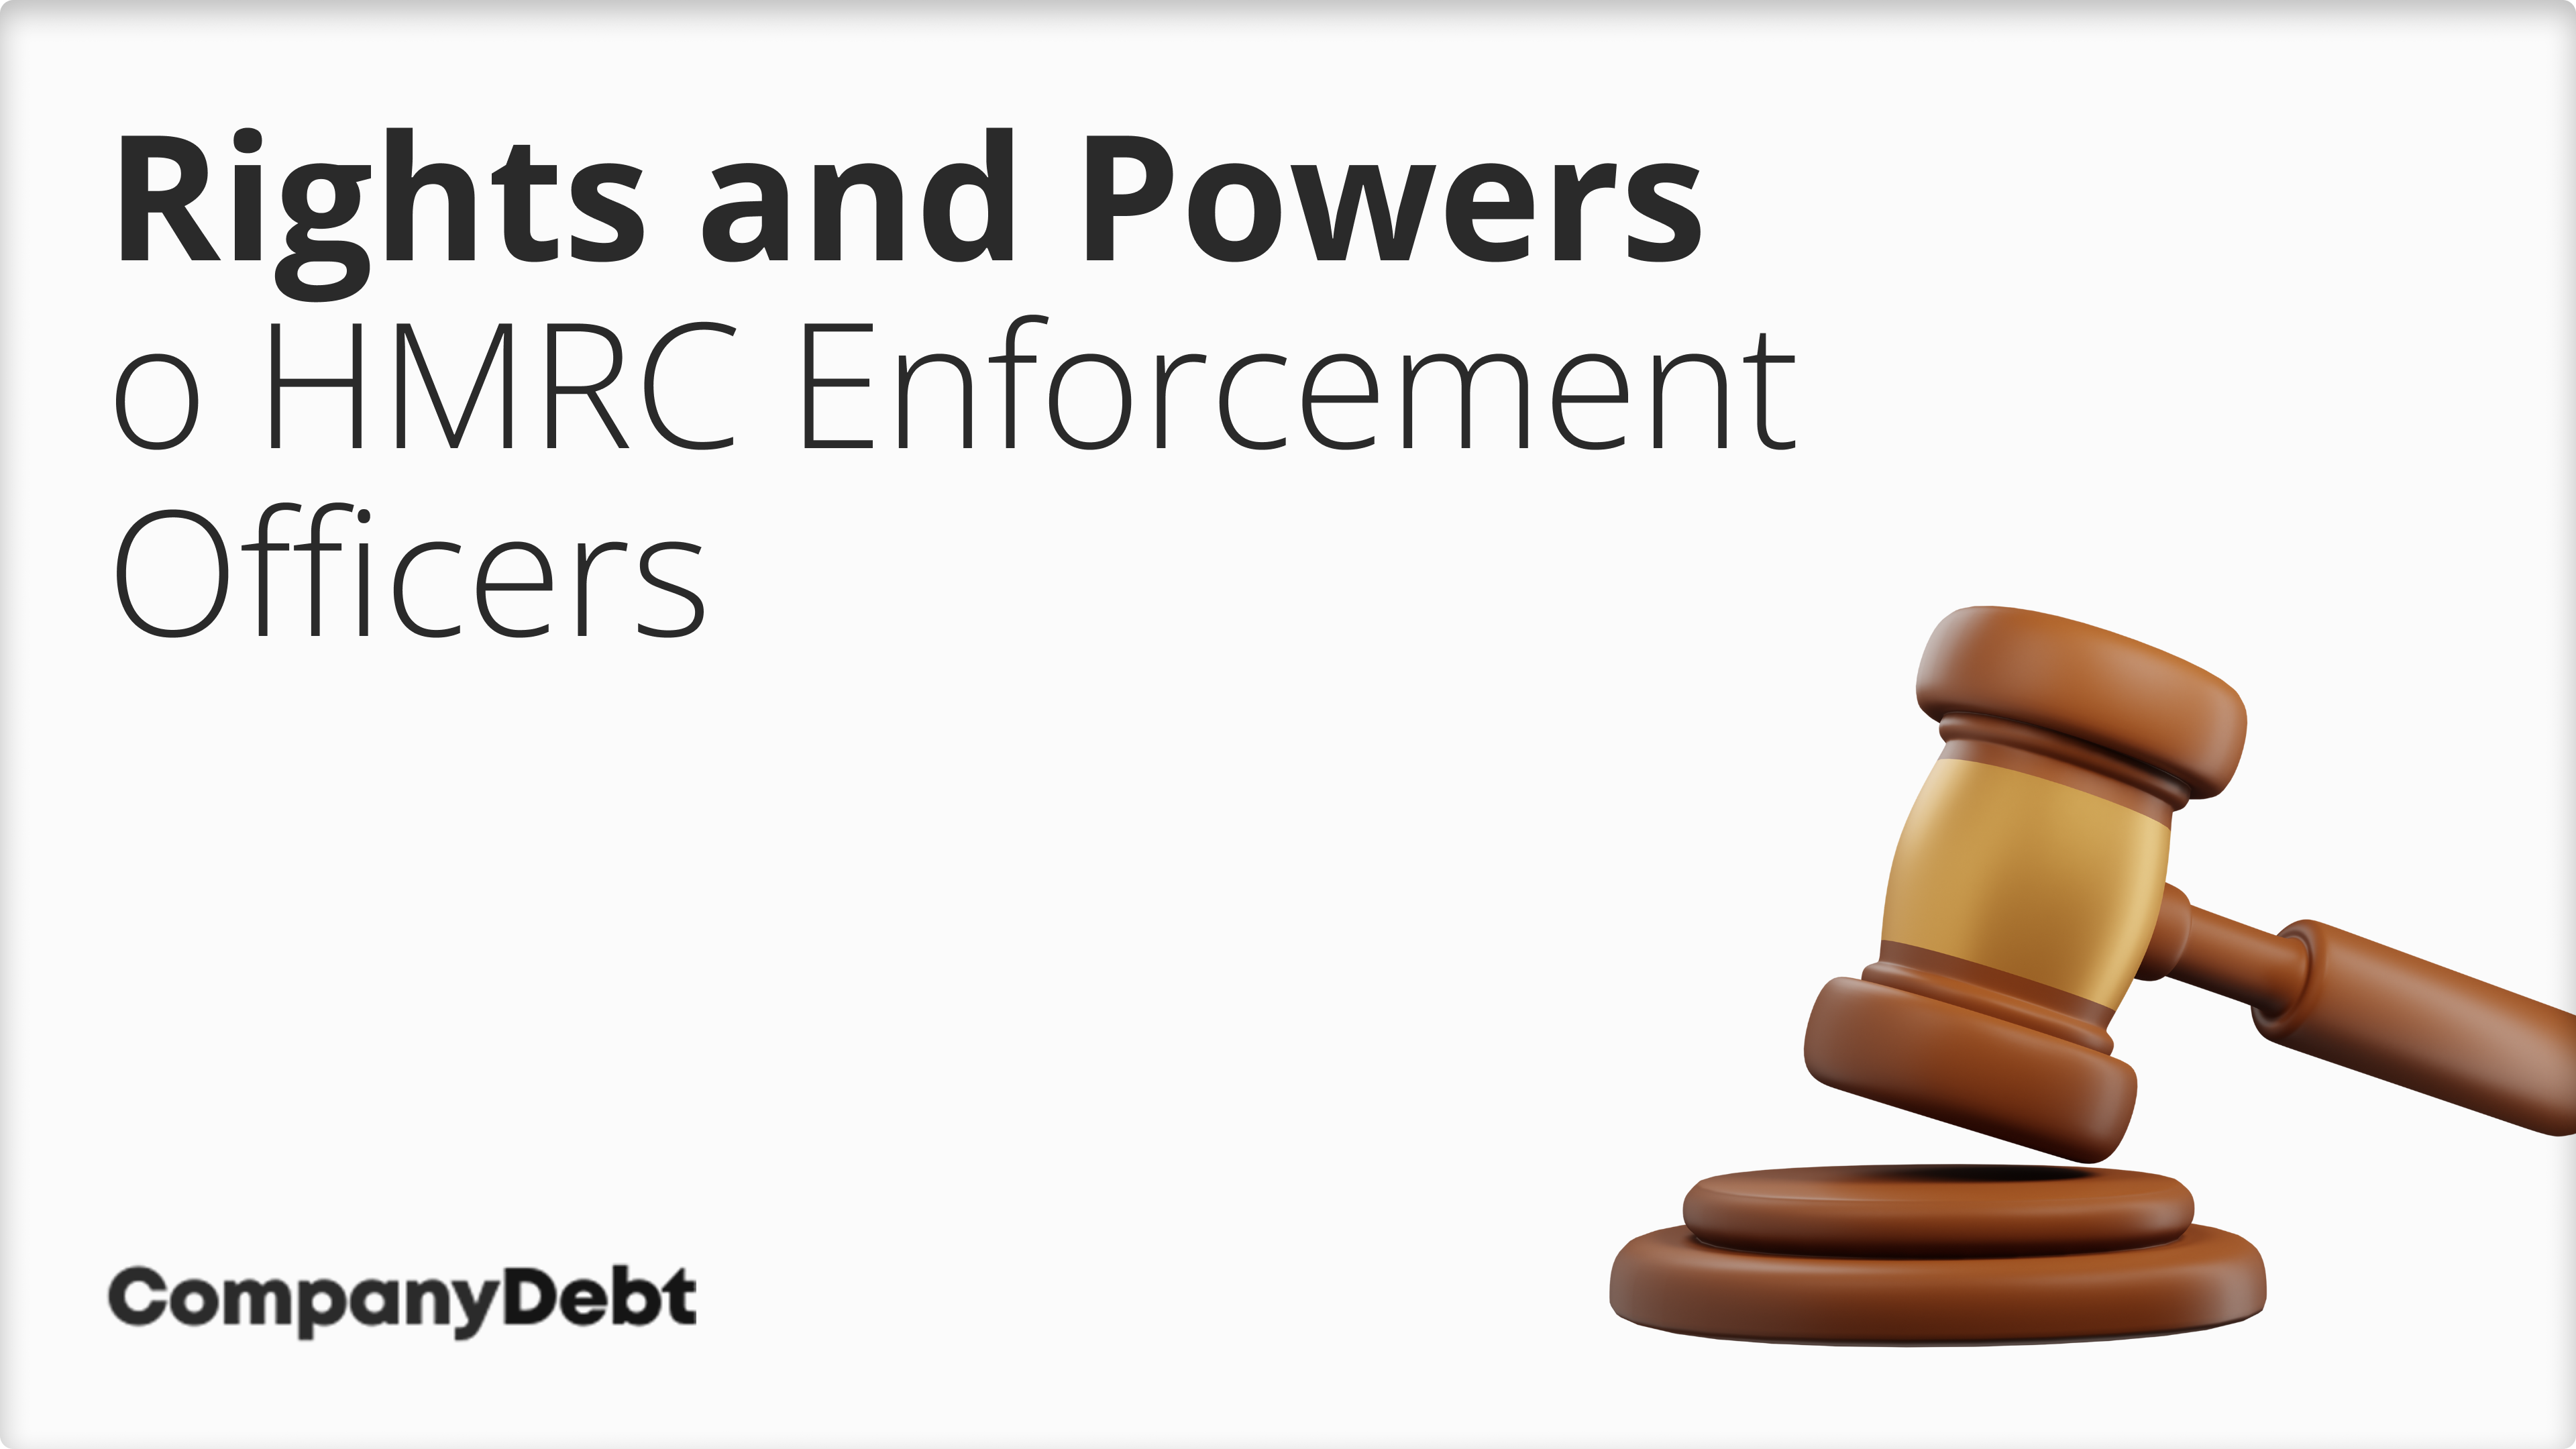 HMRC Bailiffs - What Are the Rights and Powers of Enforcement Officers?